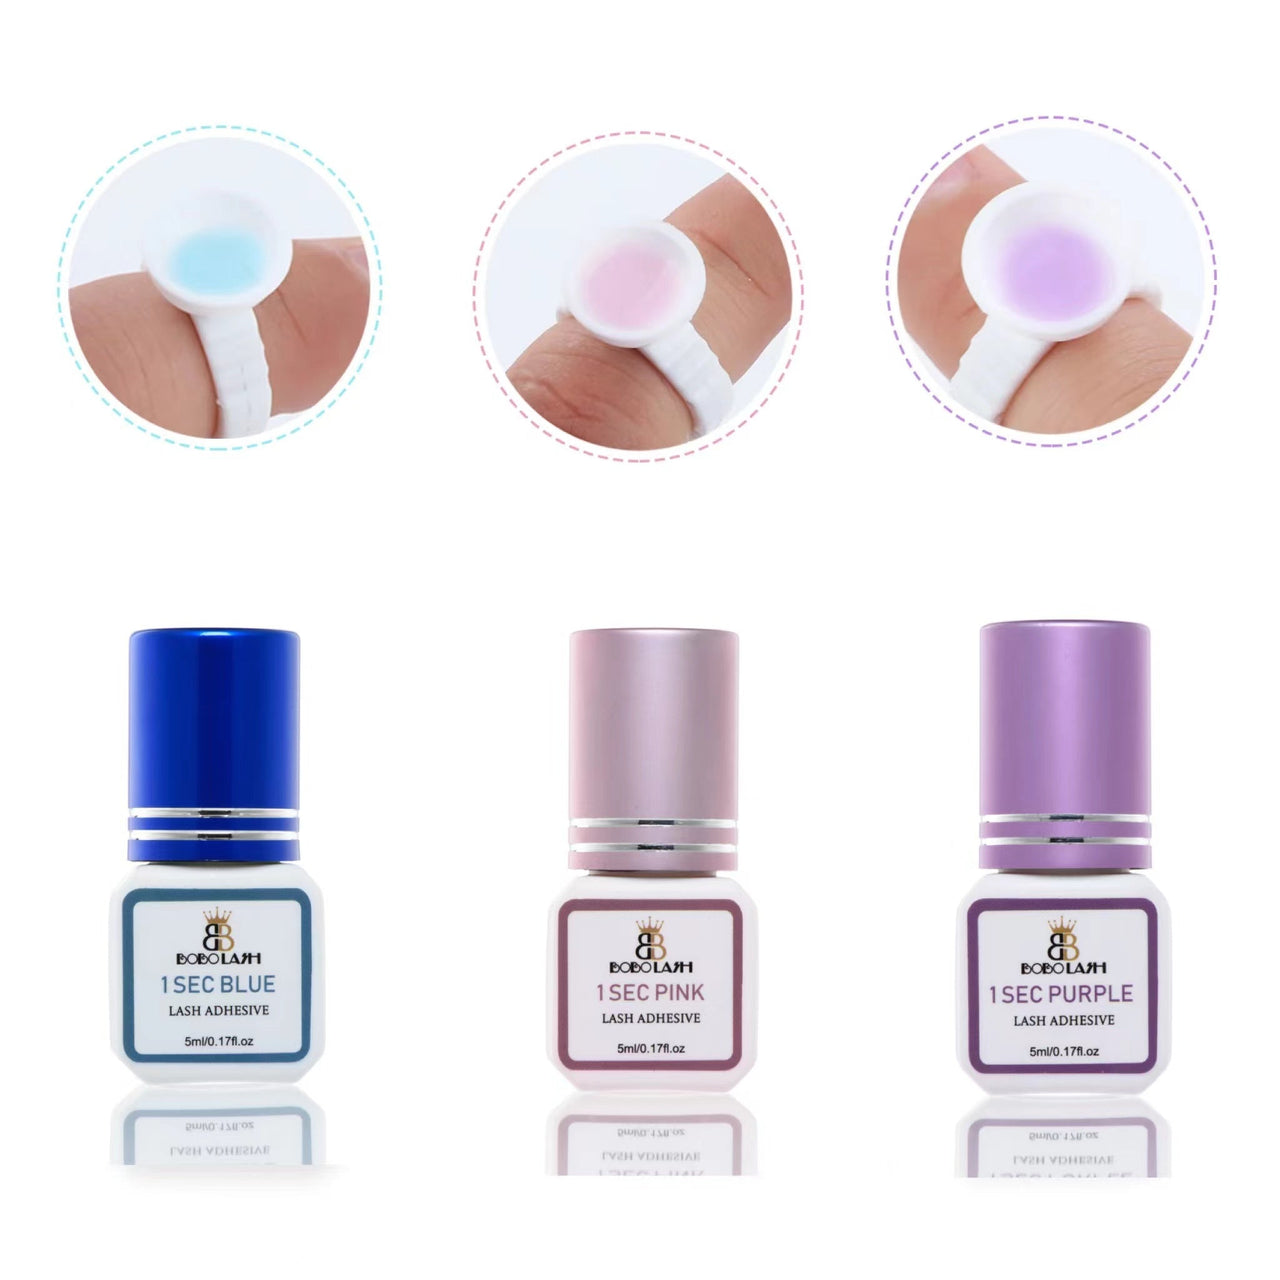 1 Second Clear & Colorful Jelly Lash Adhesive